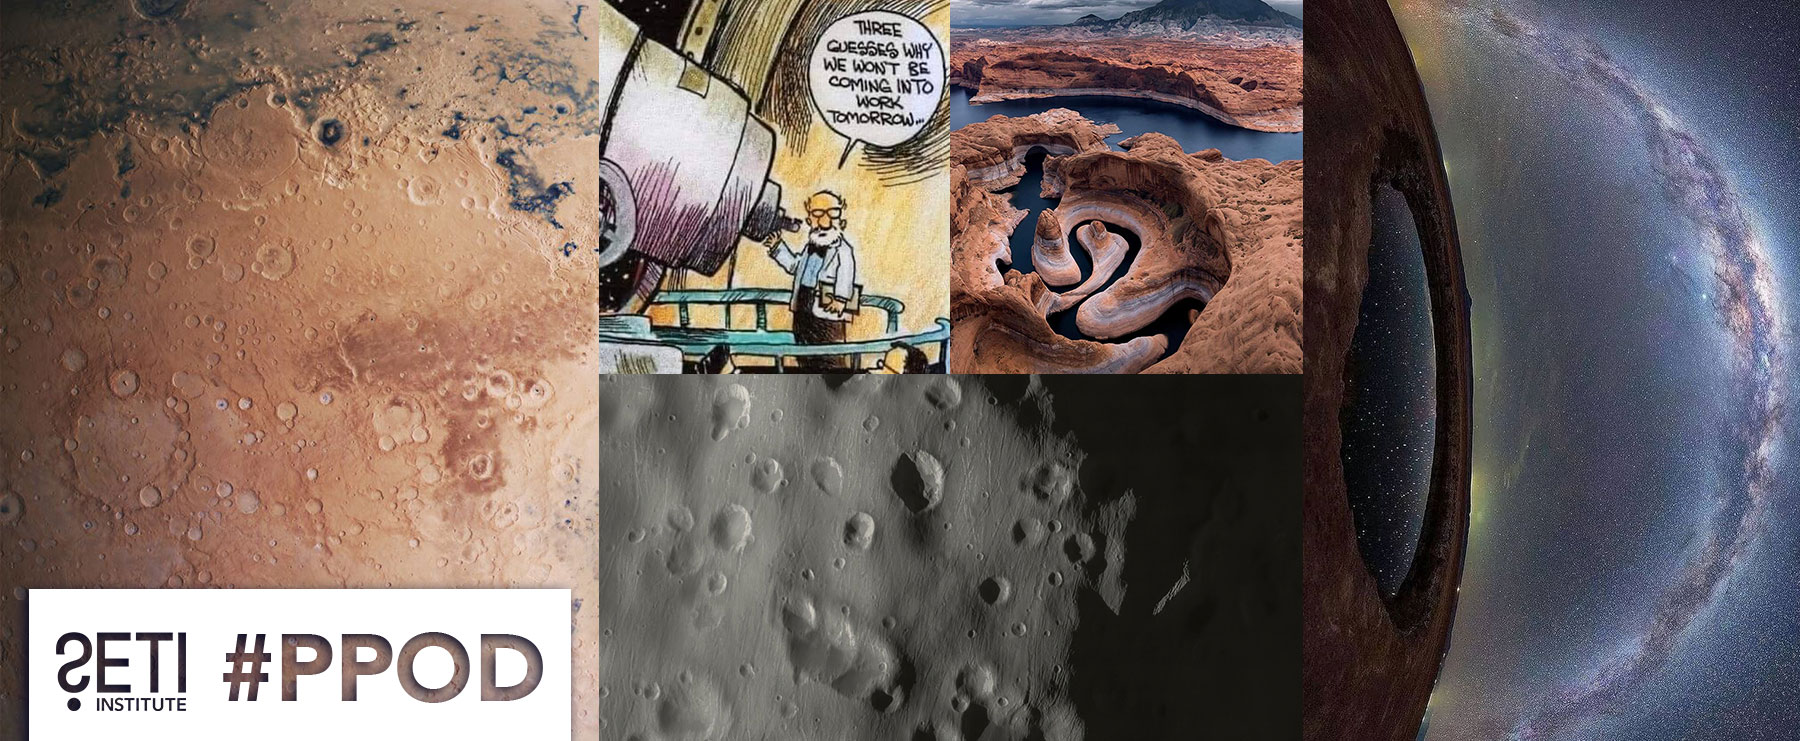 Planetary Picture of the Day collage header